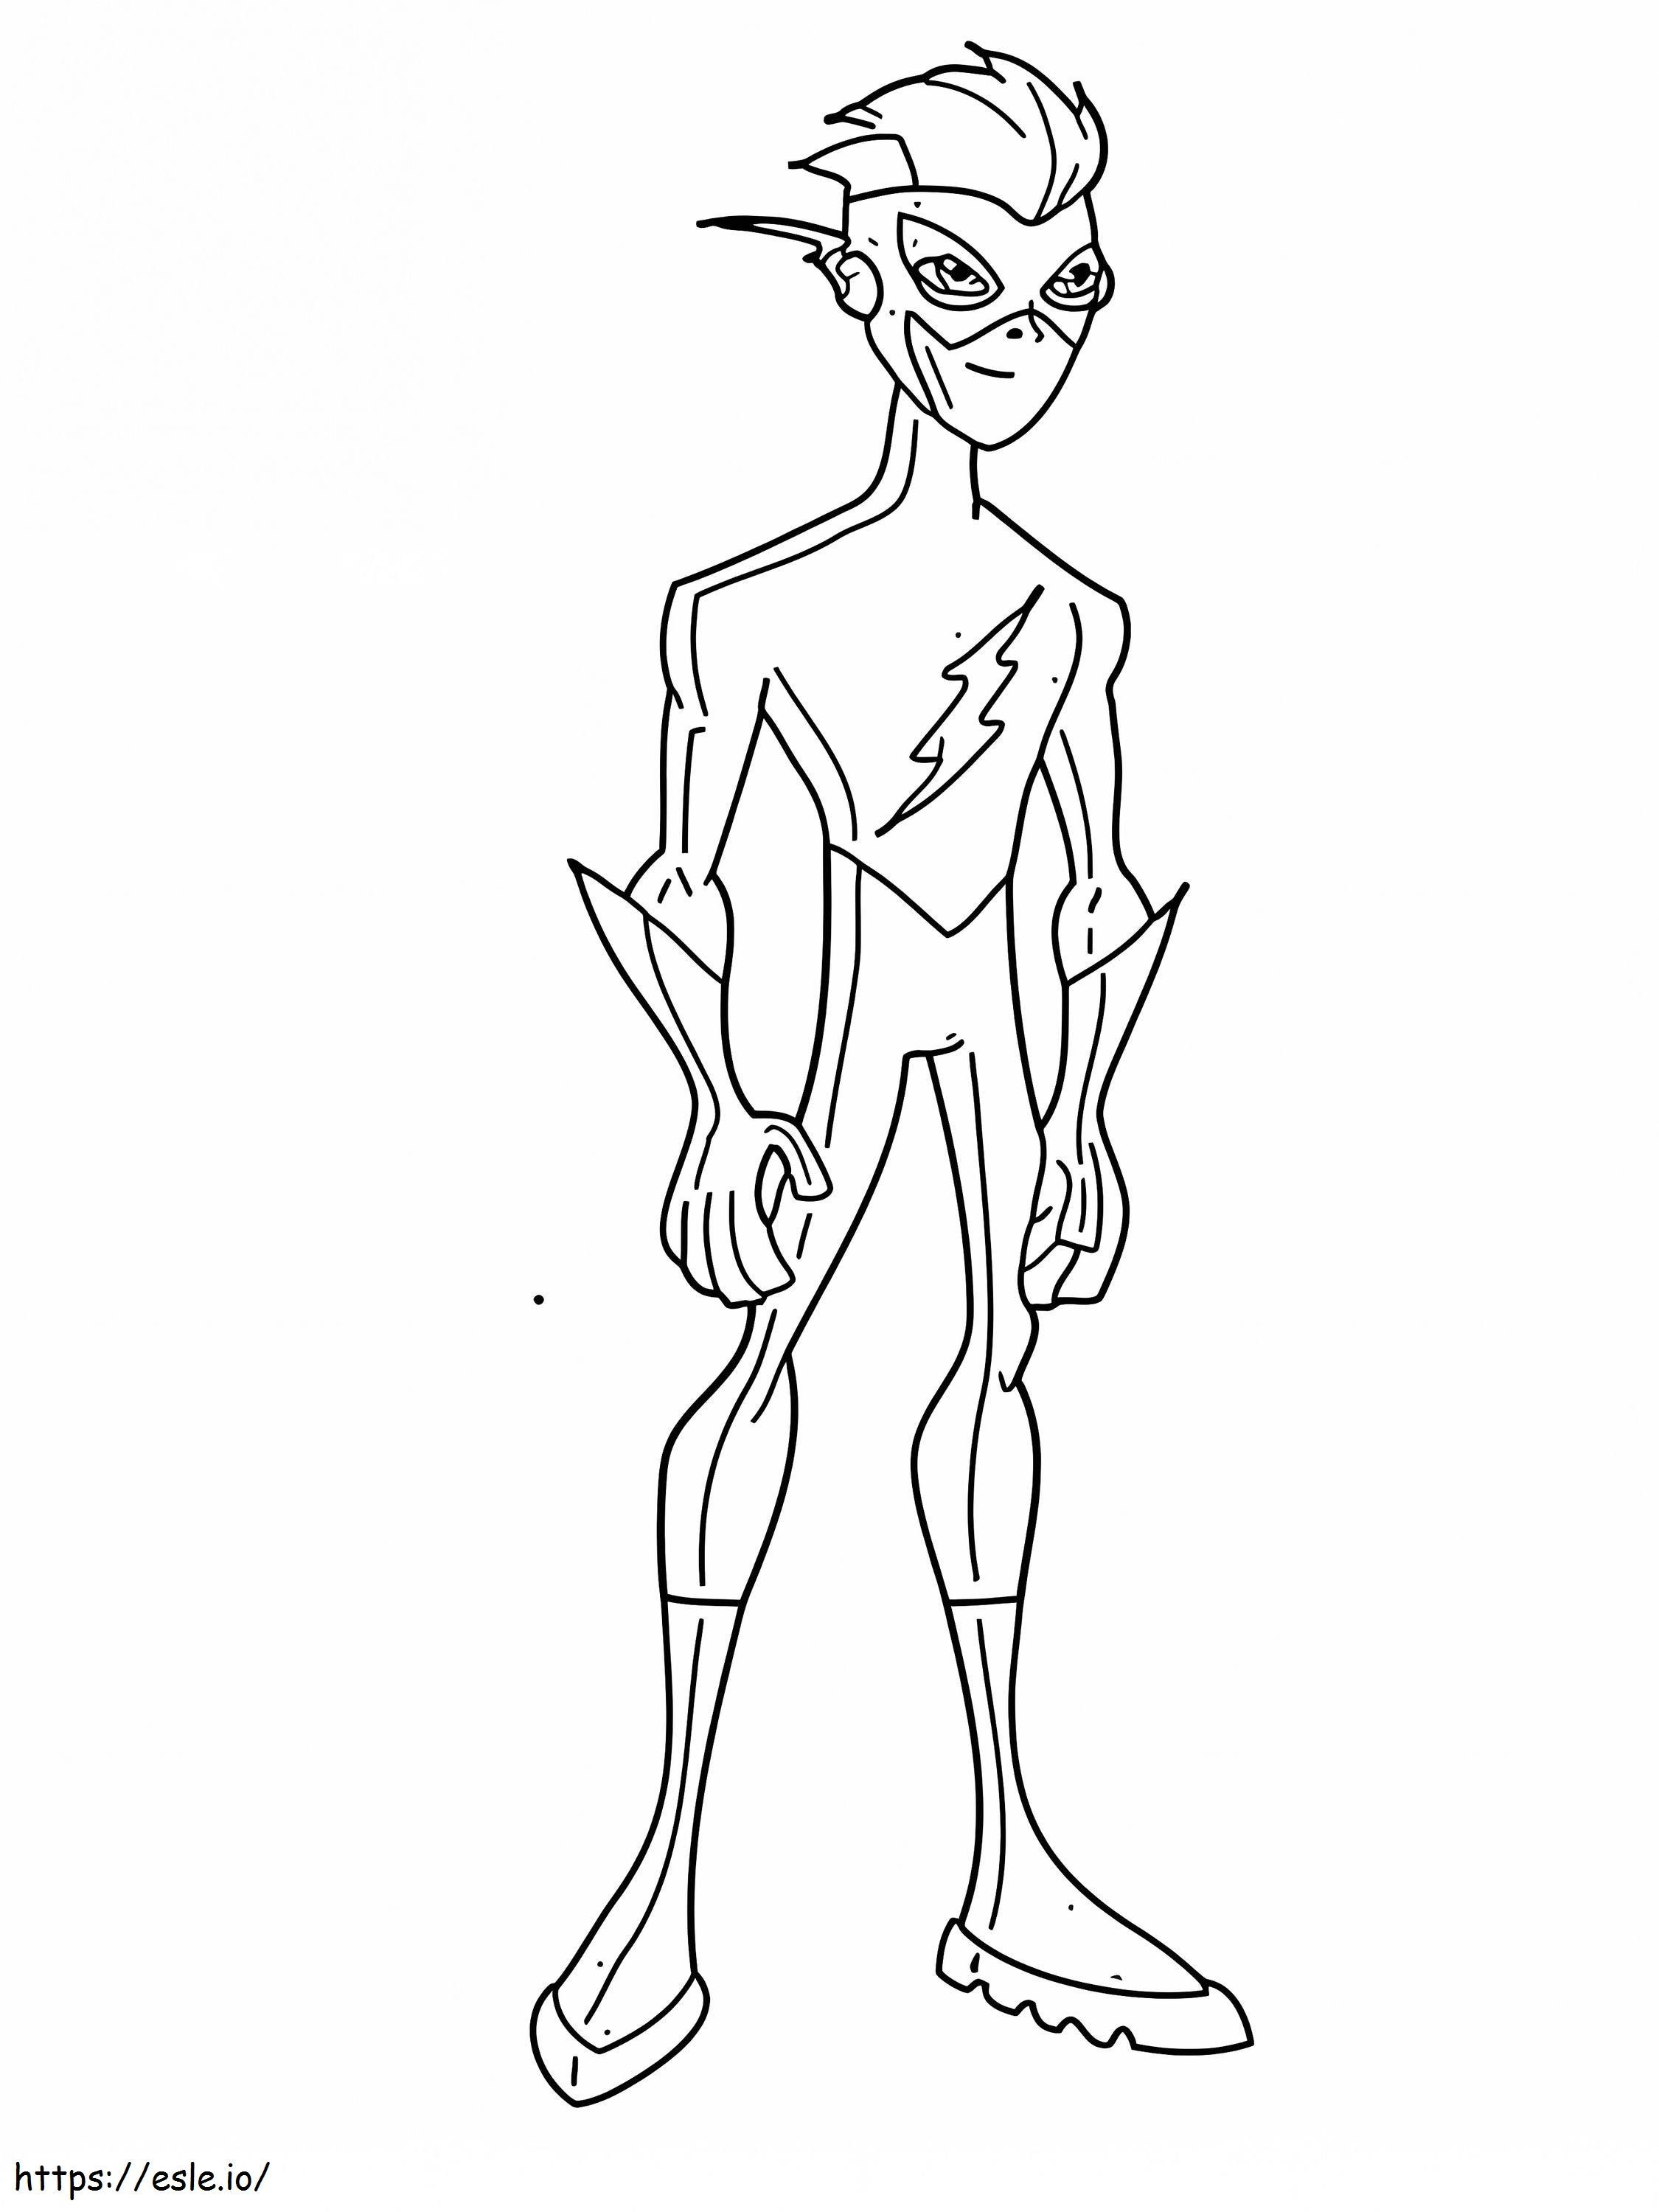 Flash Wally West coloring page